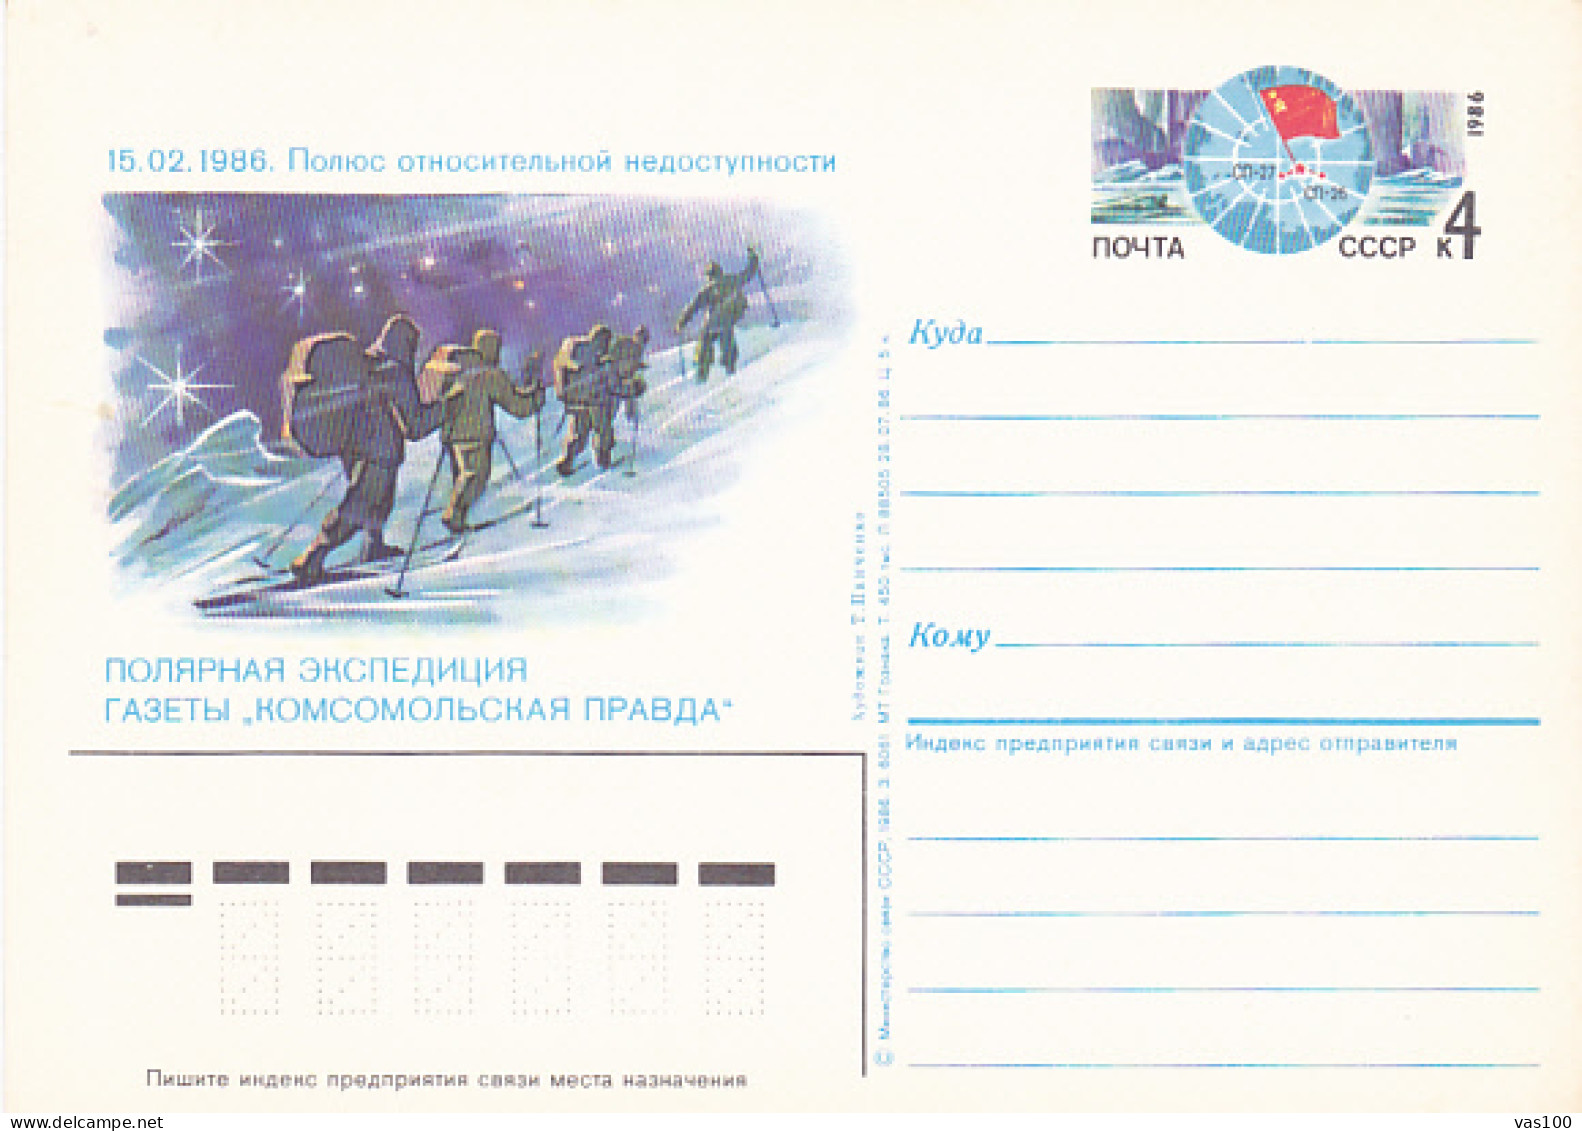 NORTH POLE, PRAVDA NEWSPAPER RUSSIAN ARCTIC EXPEDITION, PC STATIONERY, ENTIER POSTAL, 1986, RUSSIA - Arctic Expeditions